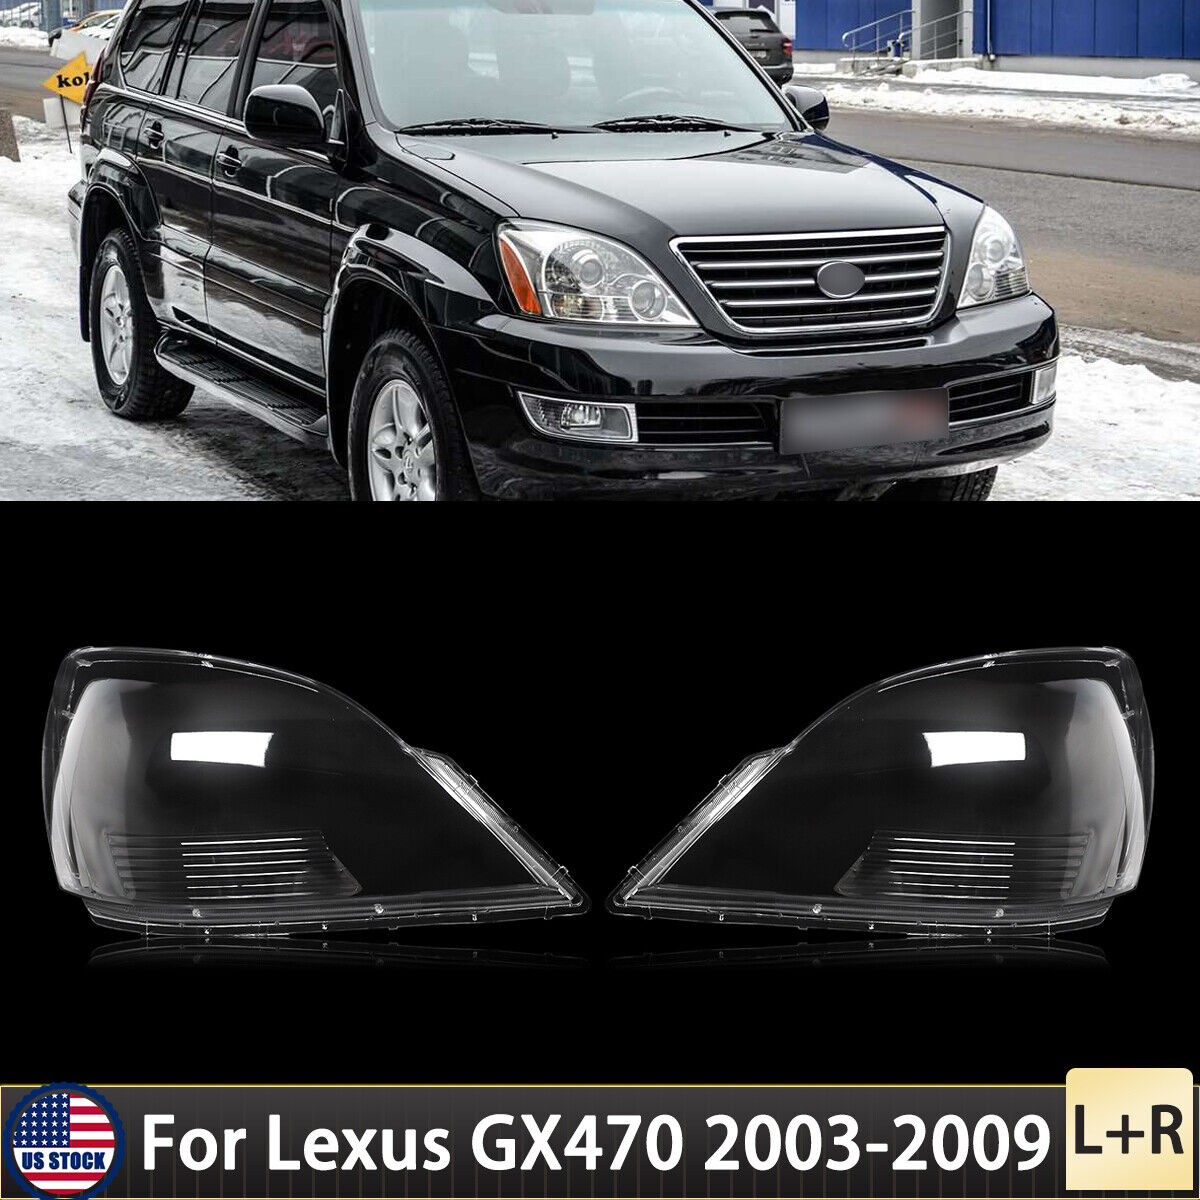 For Lexus GX470 2003-2009 Pair Headlight Lens Clear Headlamp Cover Replacement